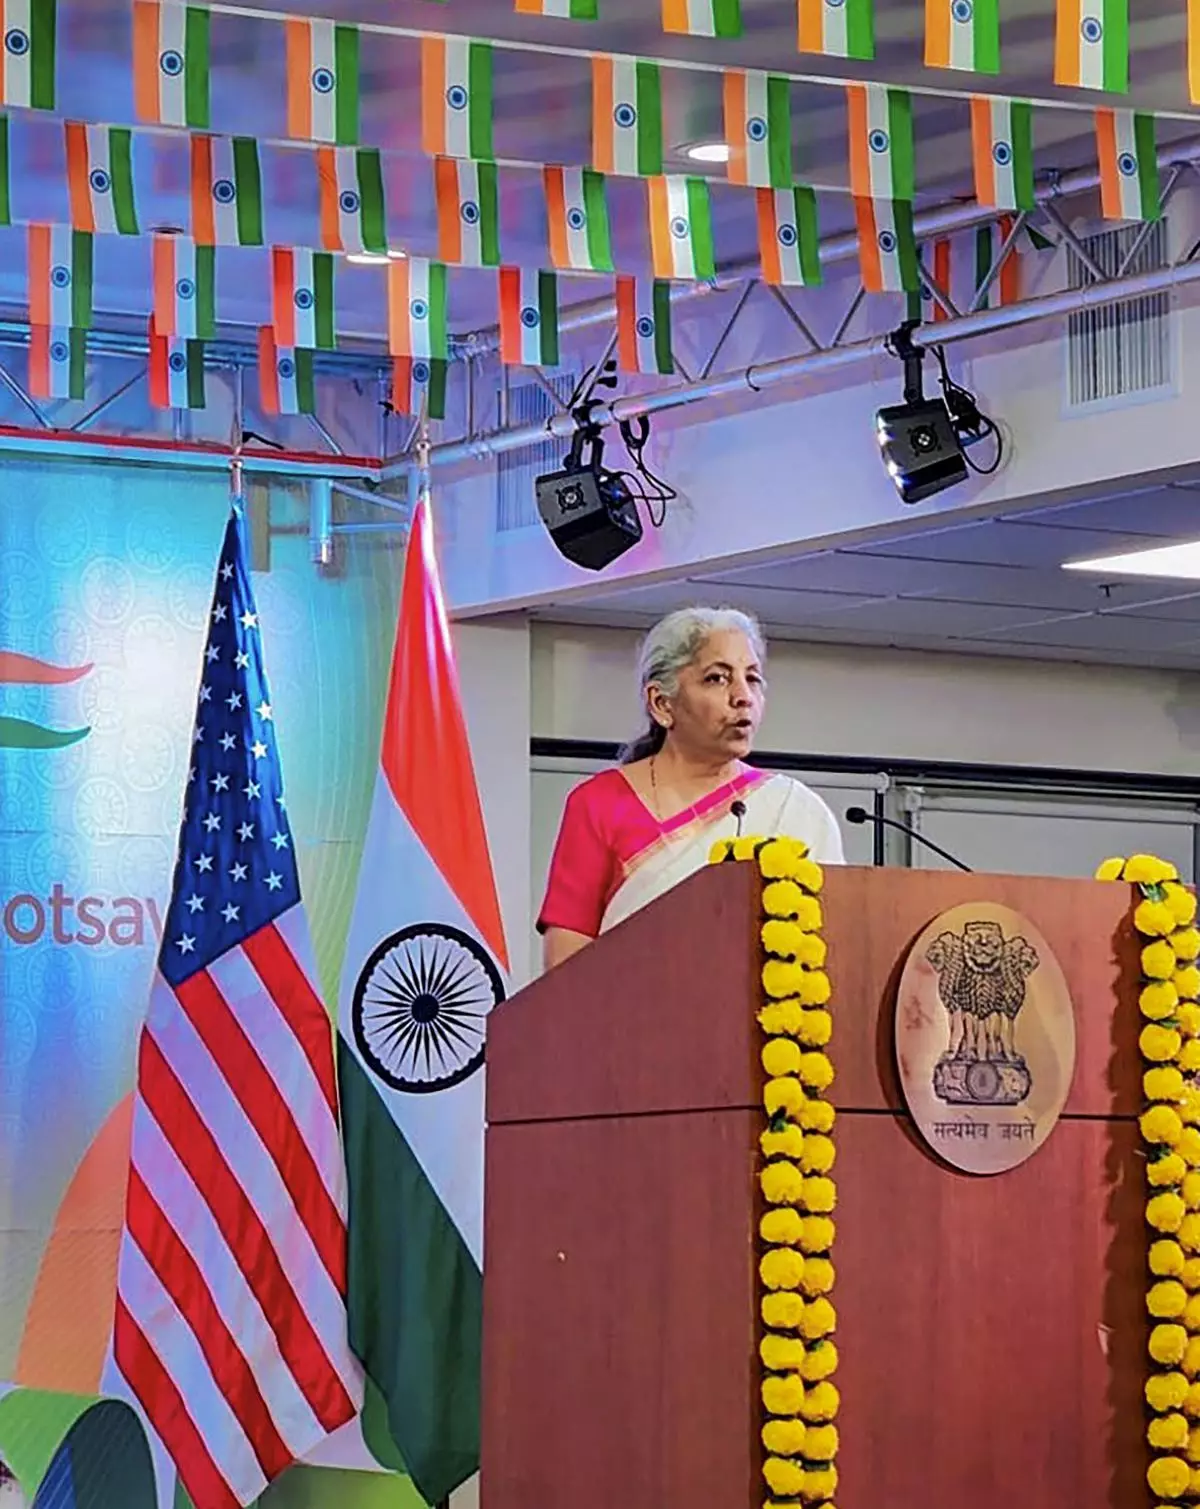 San Francisco: Union Finance Minister Nirmala Sitharaman interacts with Indian community in Silicon Valley, San Francisco Bay Area, US. (PTI Photo)